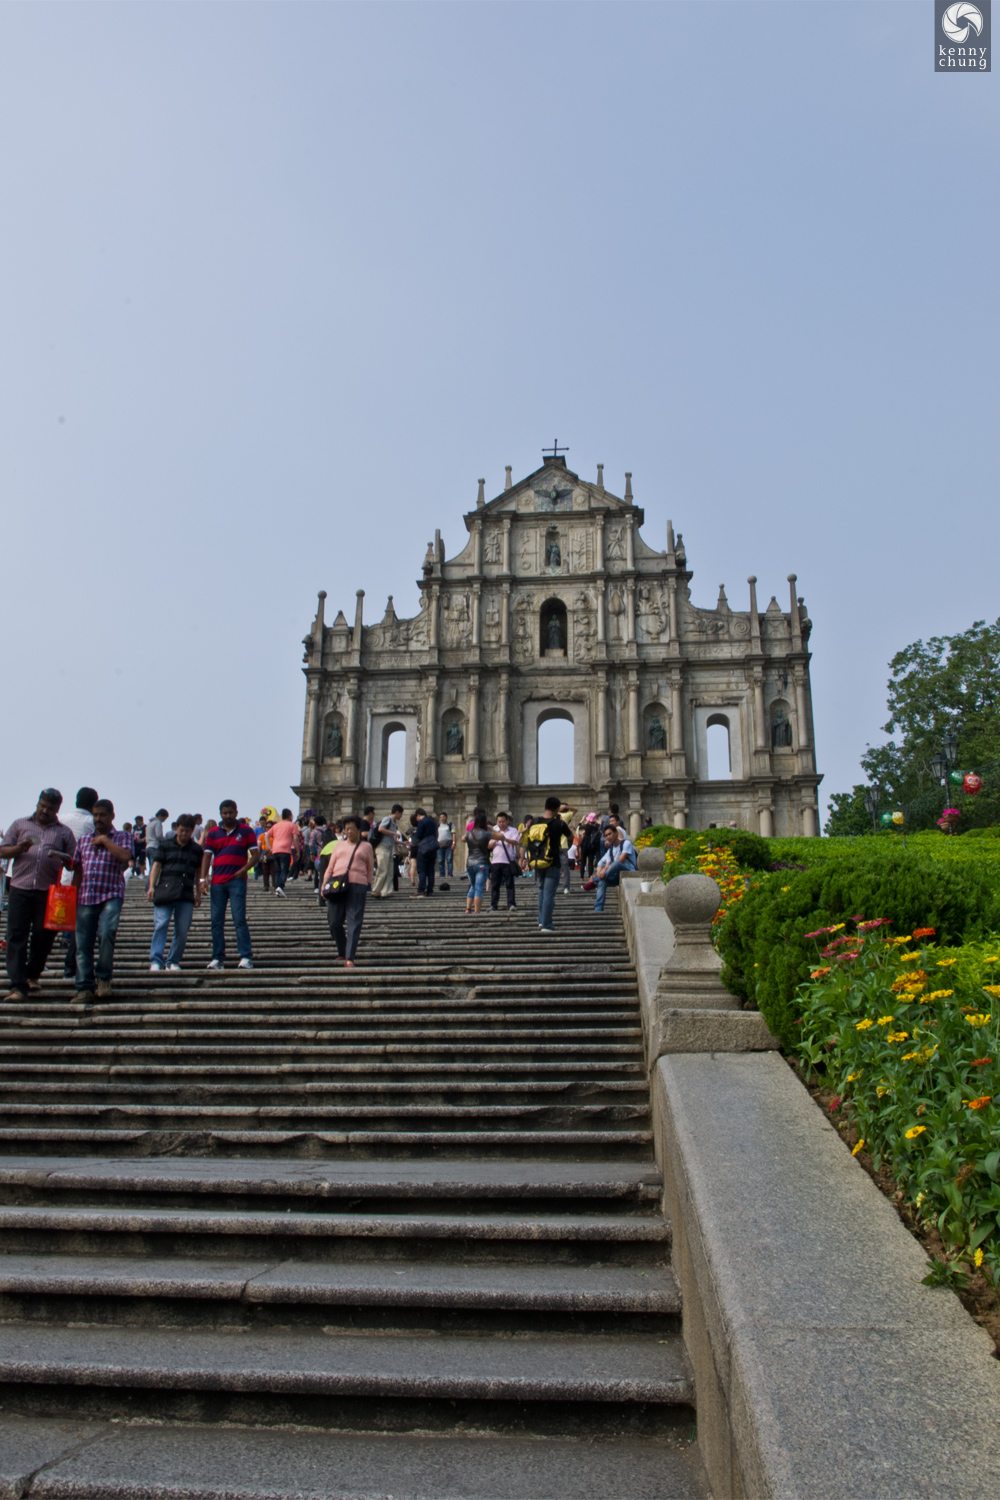 Stairs leading to the Ruins of St. Paul's in Macau